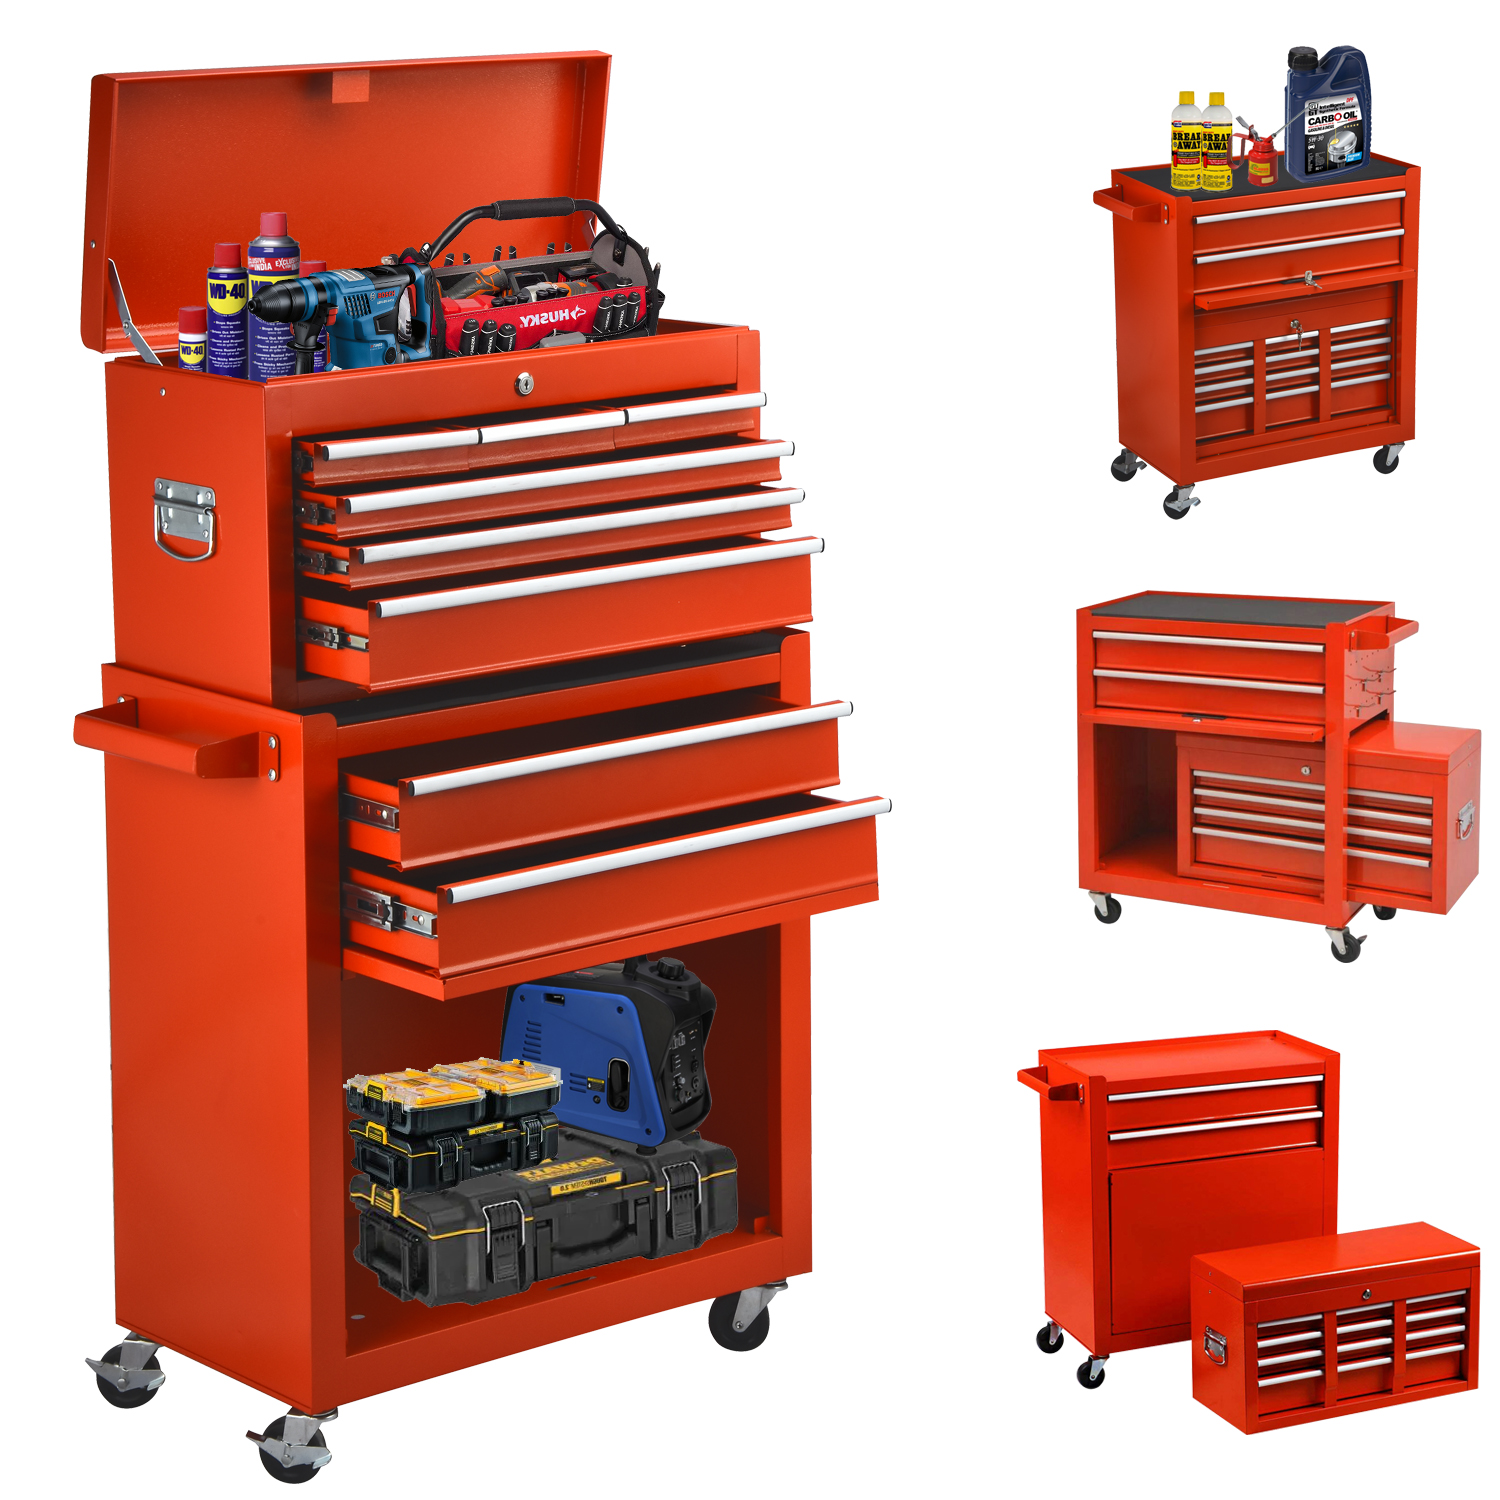 BCBYou 8-Drawer Tool Chest with Wheels, Tool Storage Cabinet and Tool Box, Lockable Rolling Tool Chest with drawers, Toolbox Organizer for Garage Warehouse Workshop (Red) - image 1 of 8